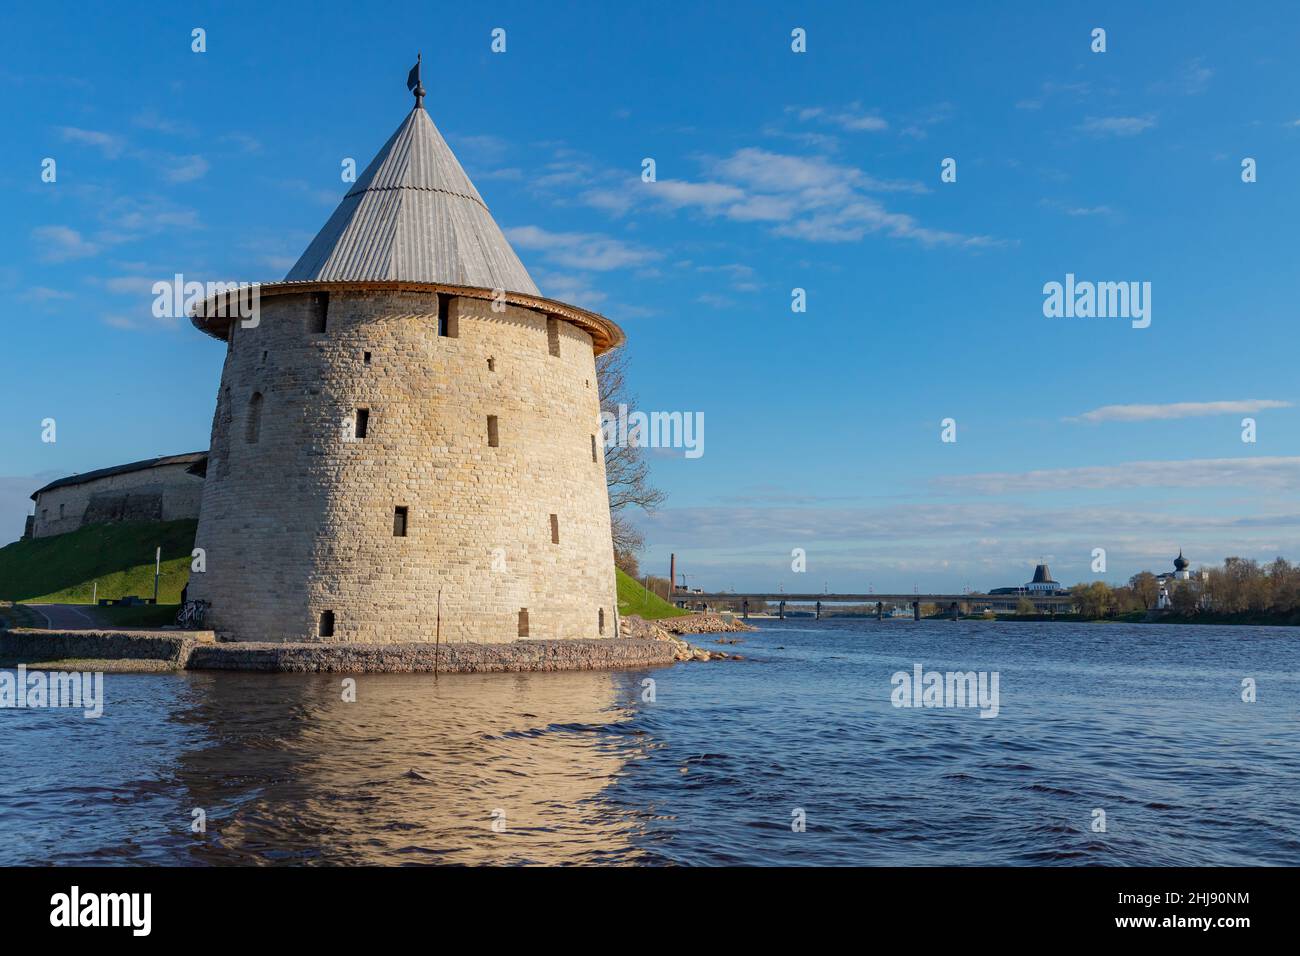 Round stone tower of the Kremlin of Pskov, ancient coastal fortification in Russian Federation Stock Photo